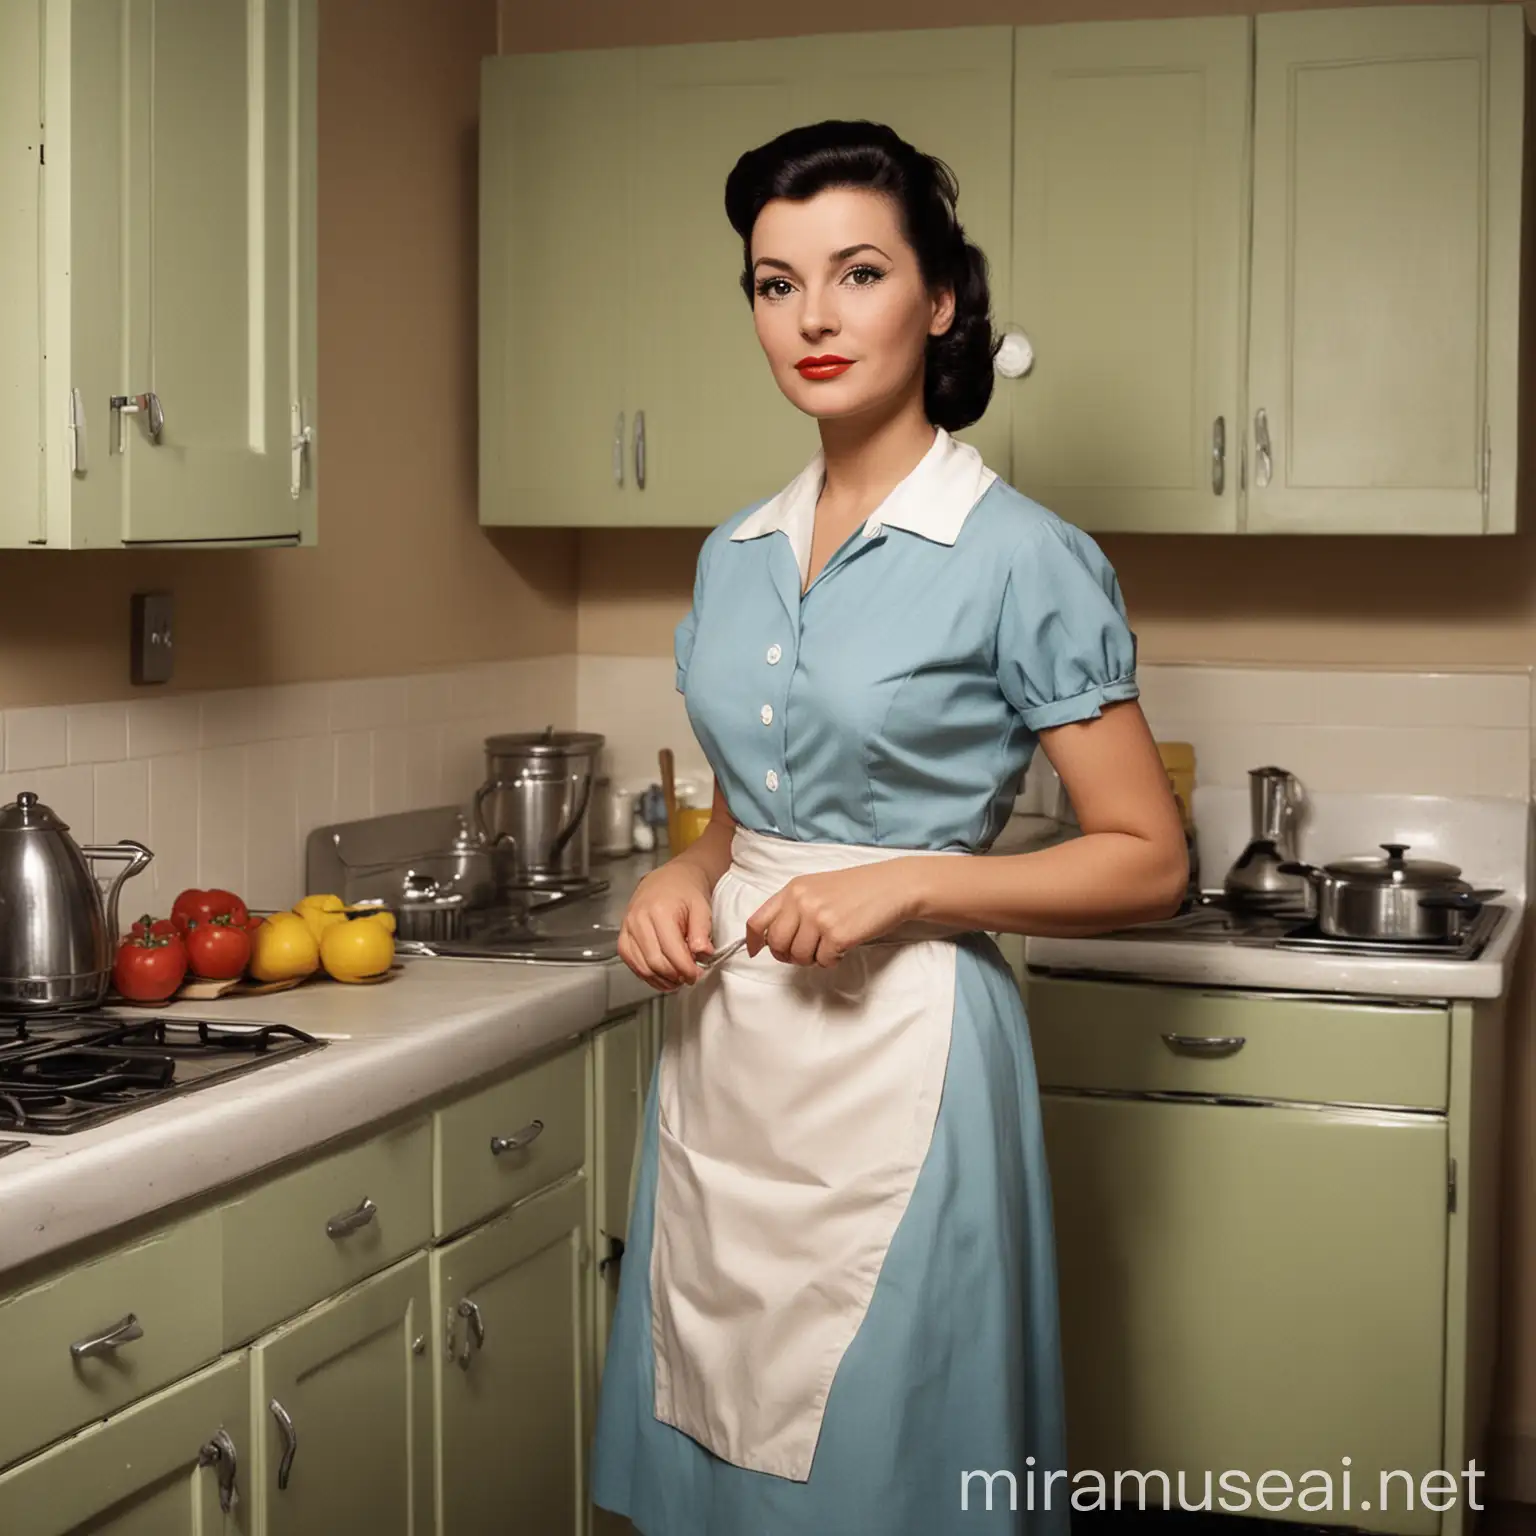 1950s Style Housewife Standing in Kitchen with Dark Hair